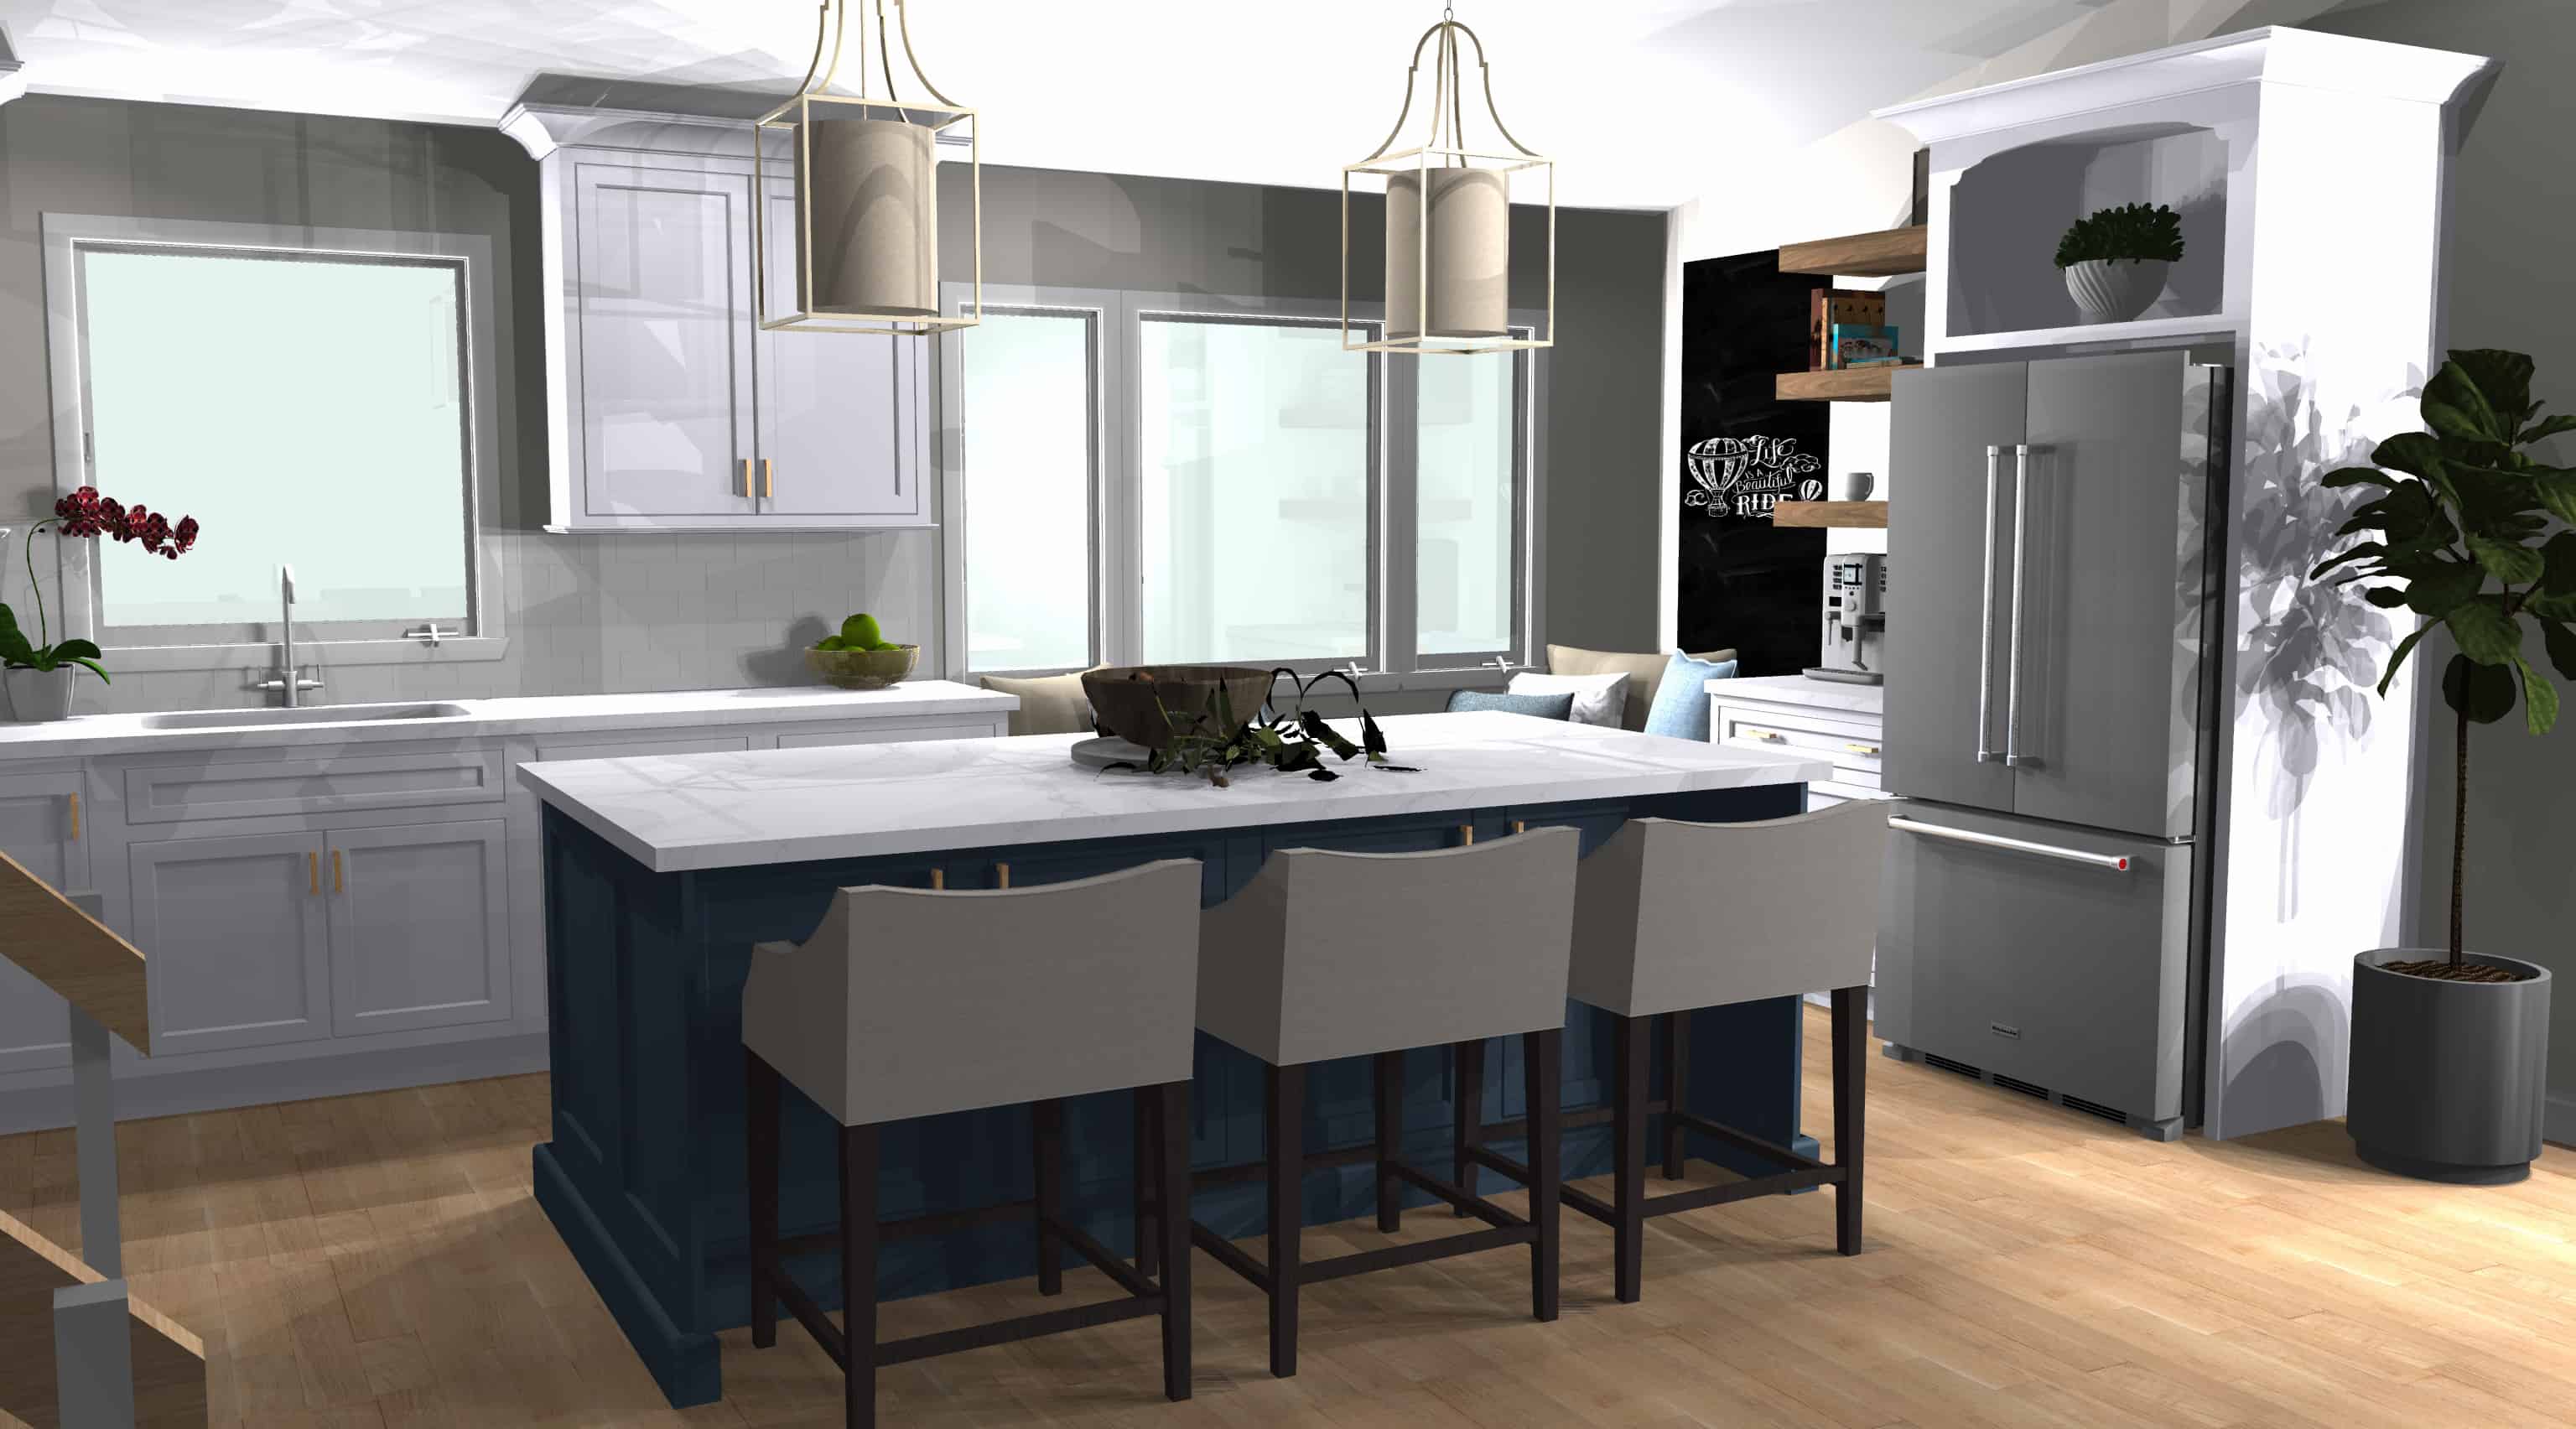 3D drawing of new kitchen design concept